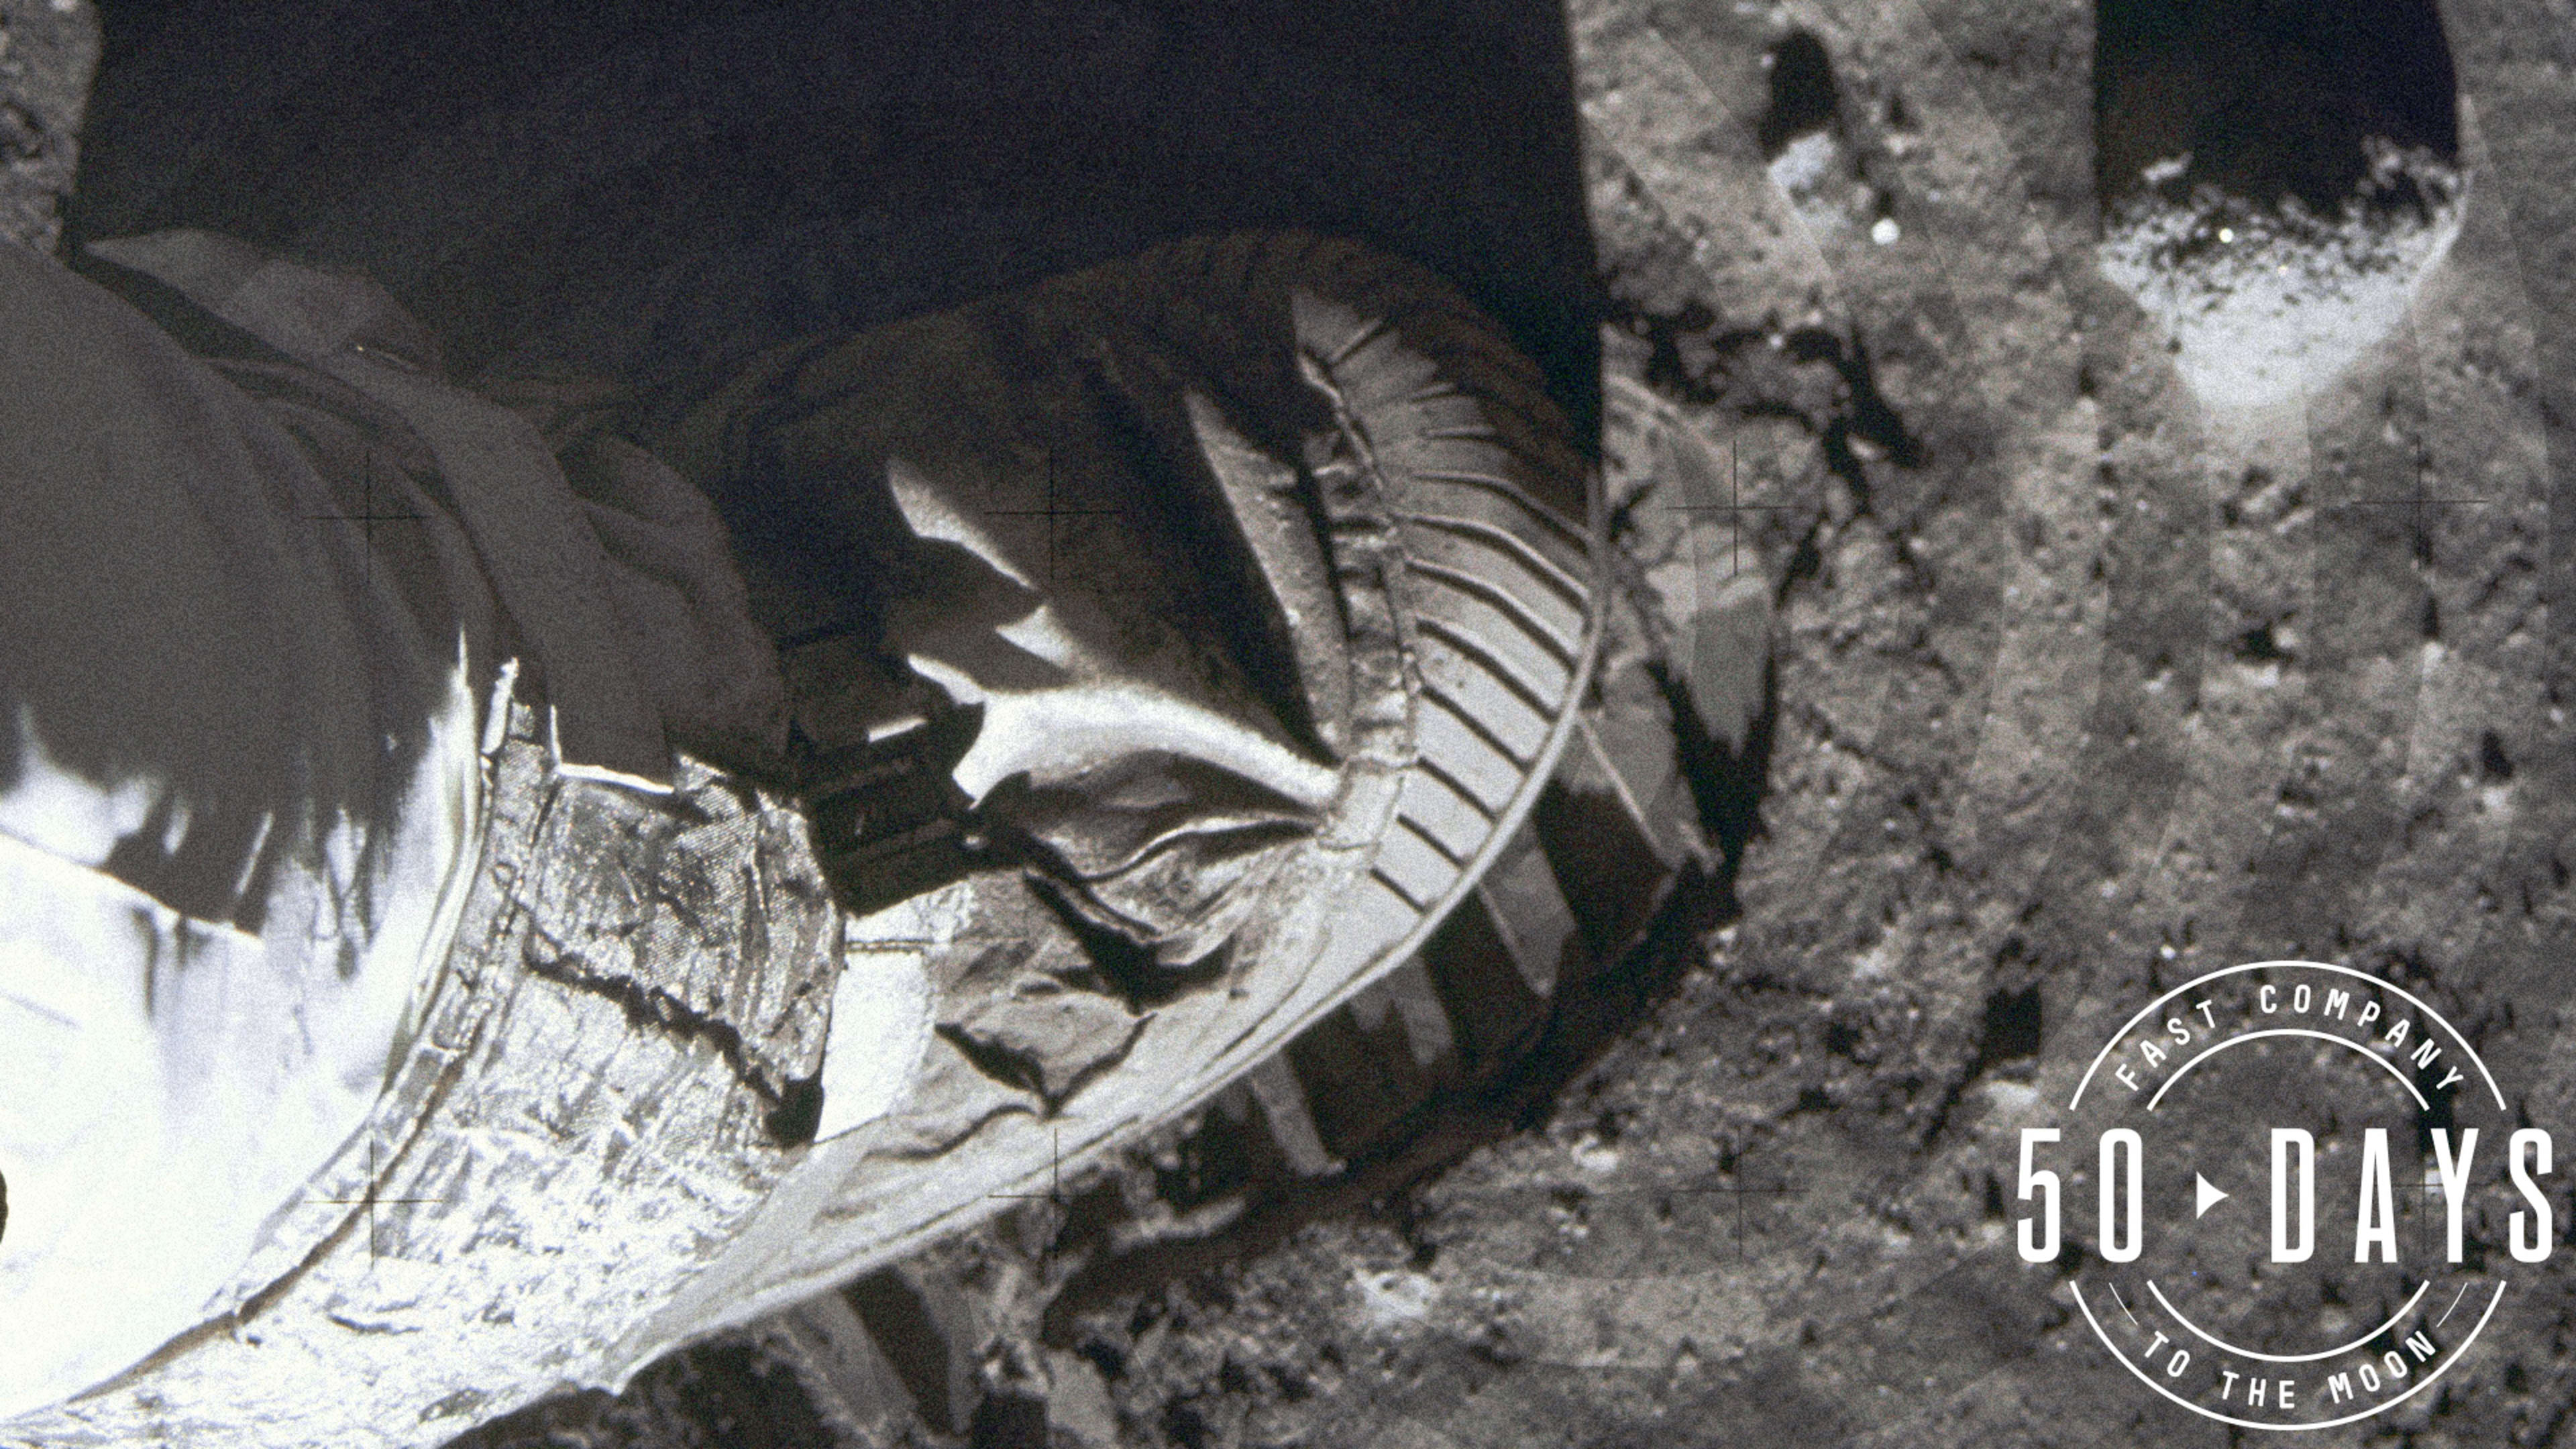 Apollo 11 really landed on the Moon—and here’s how you can be sure (sorry, conspiracy nuts)